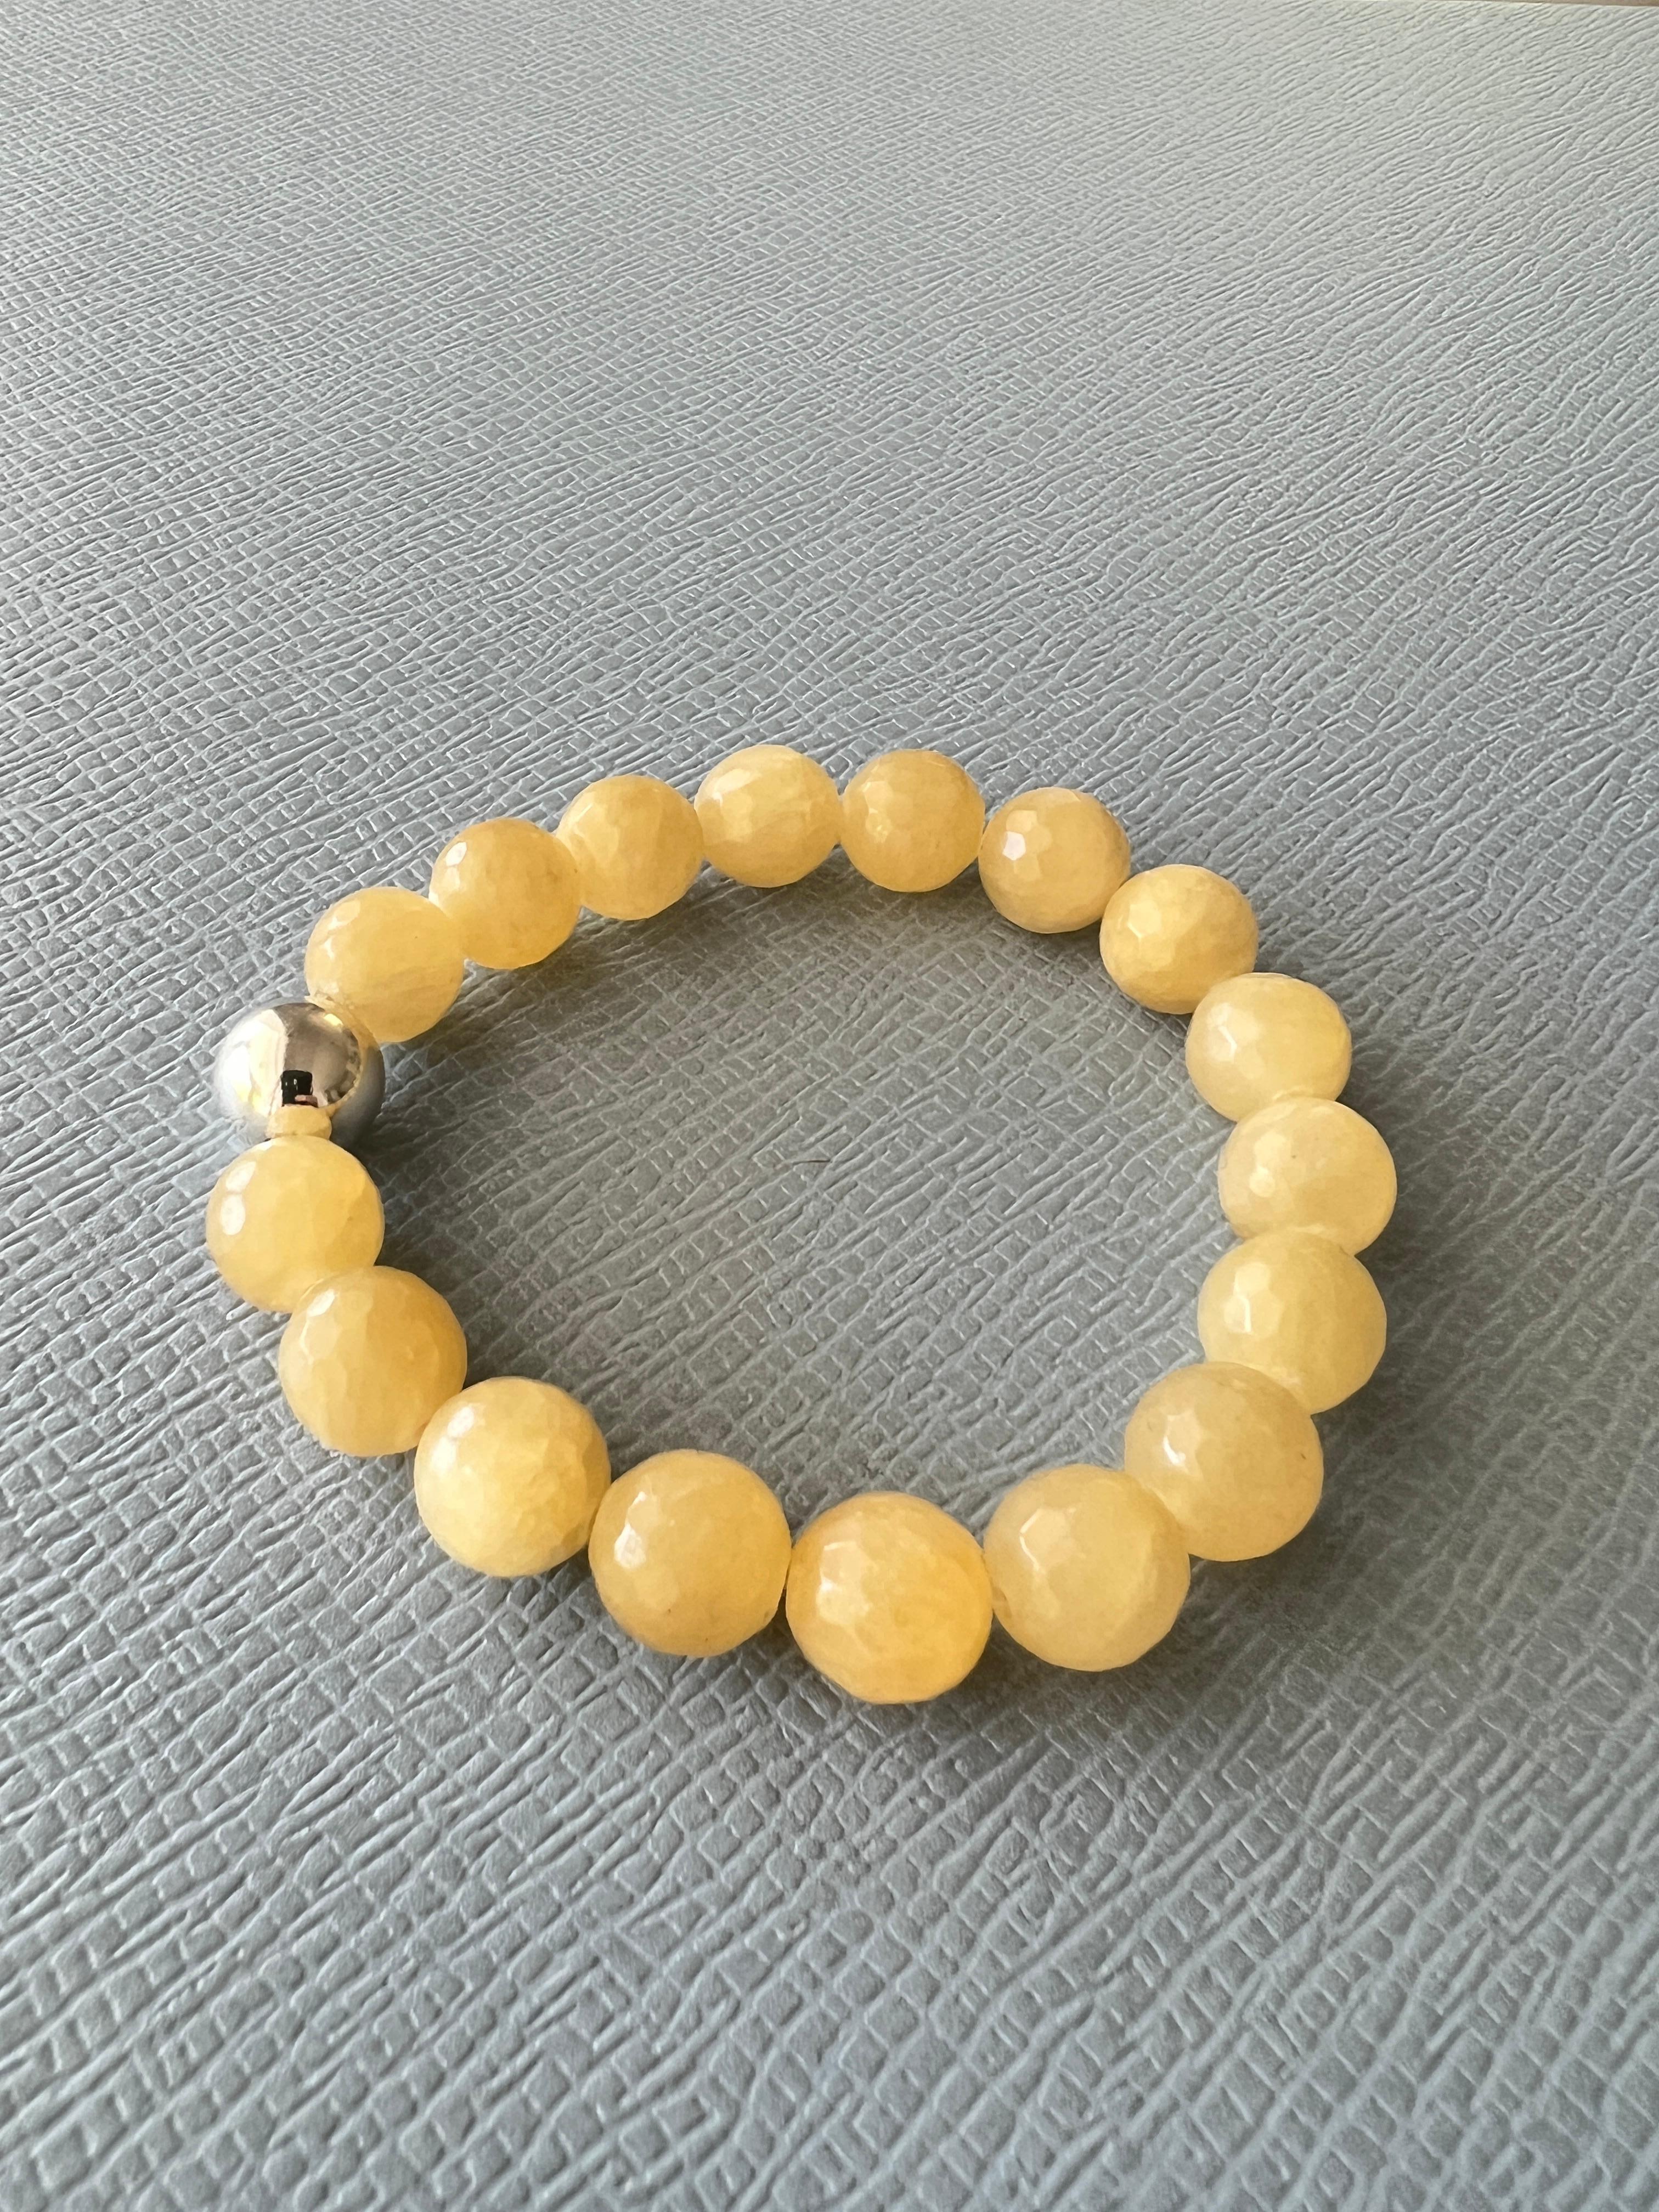 Yellow Calcite Round Facteted Bead Bracelet Silver J Dauphin For Sale 1